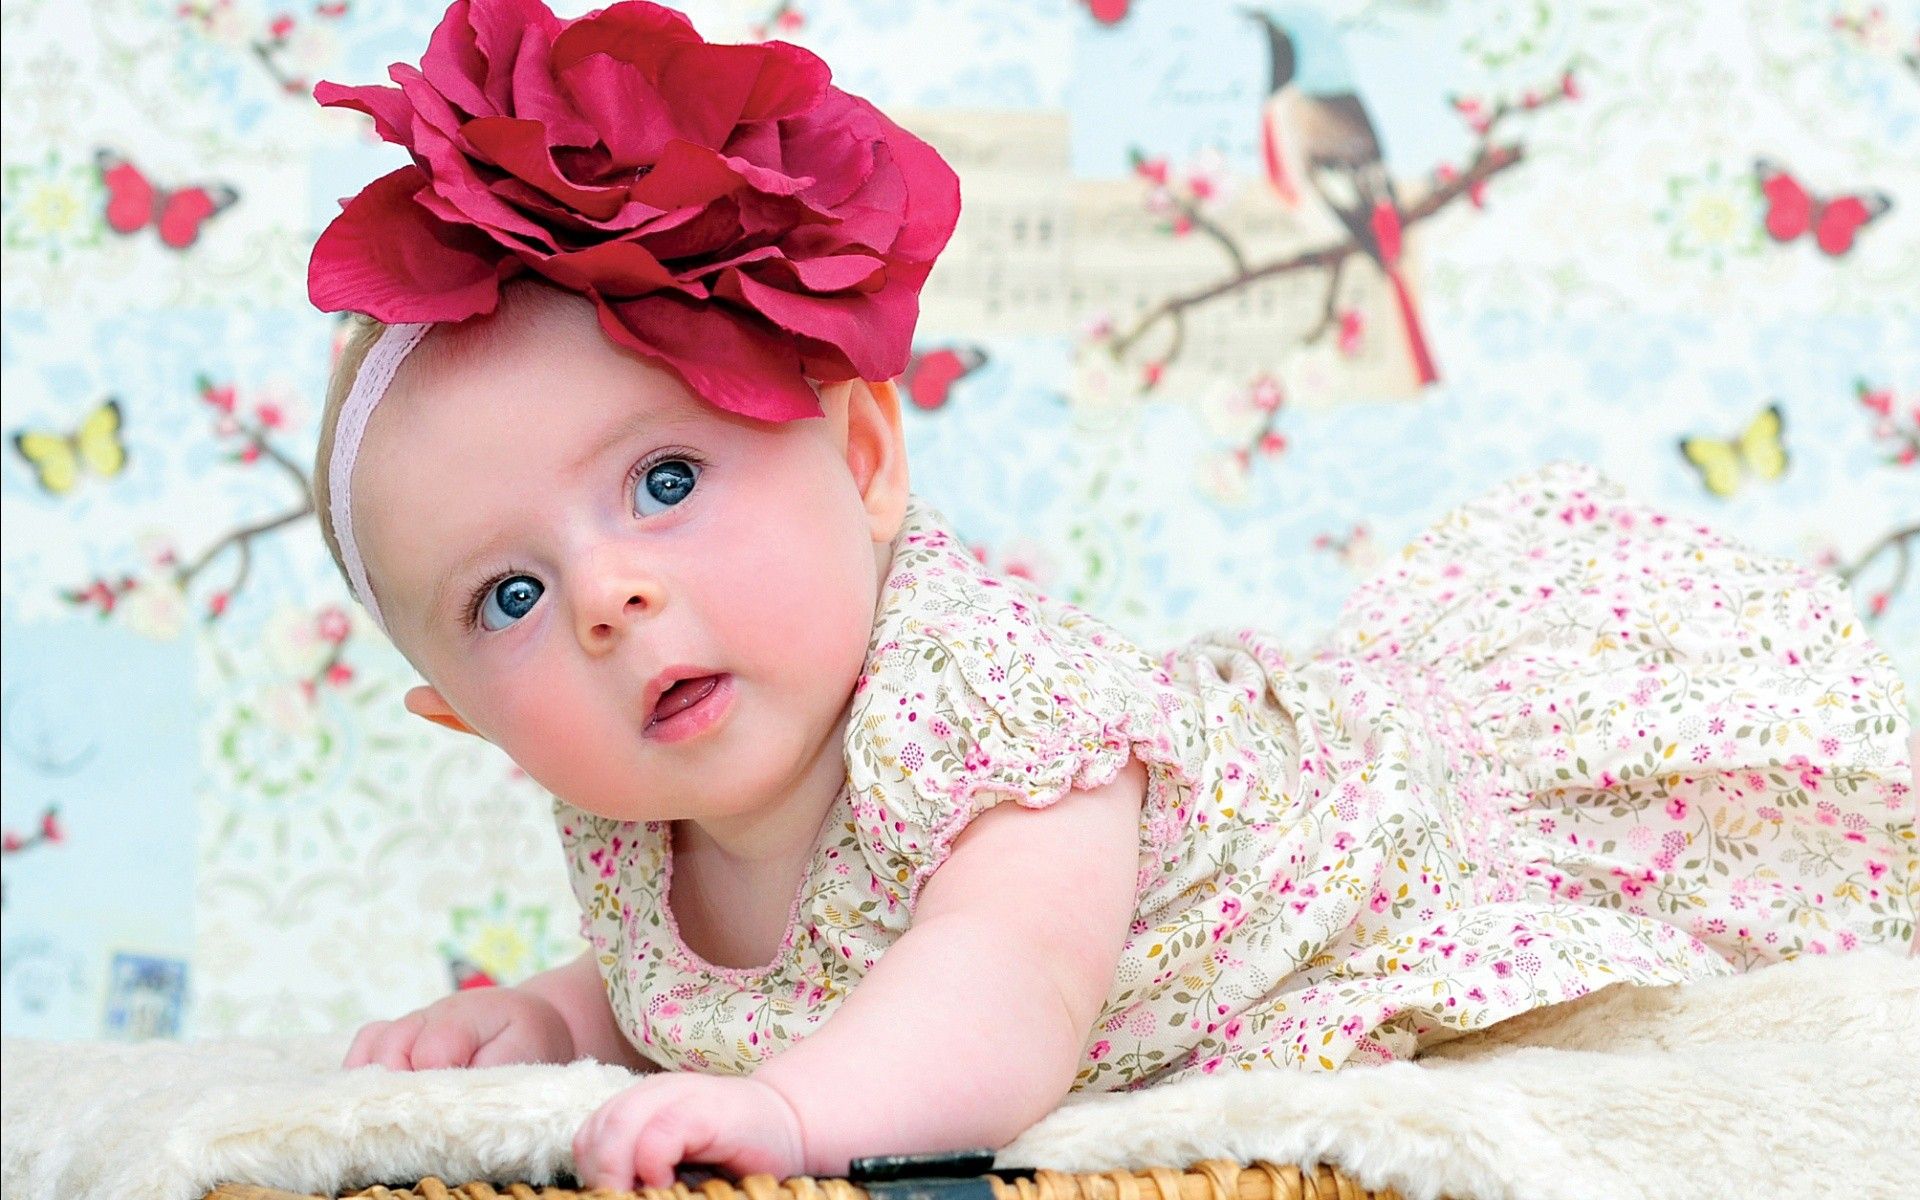 Wallpapers Cute Baby Download Group (72+)